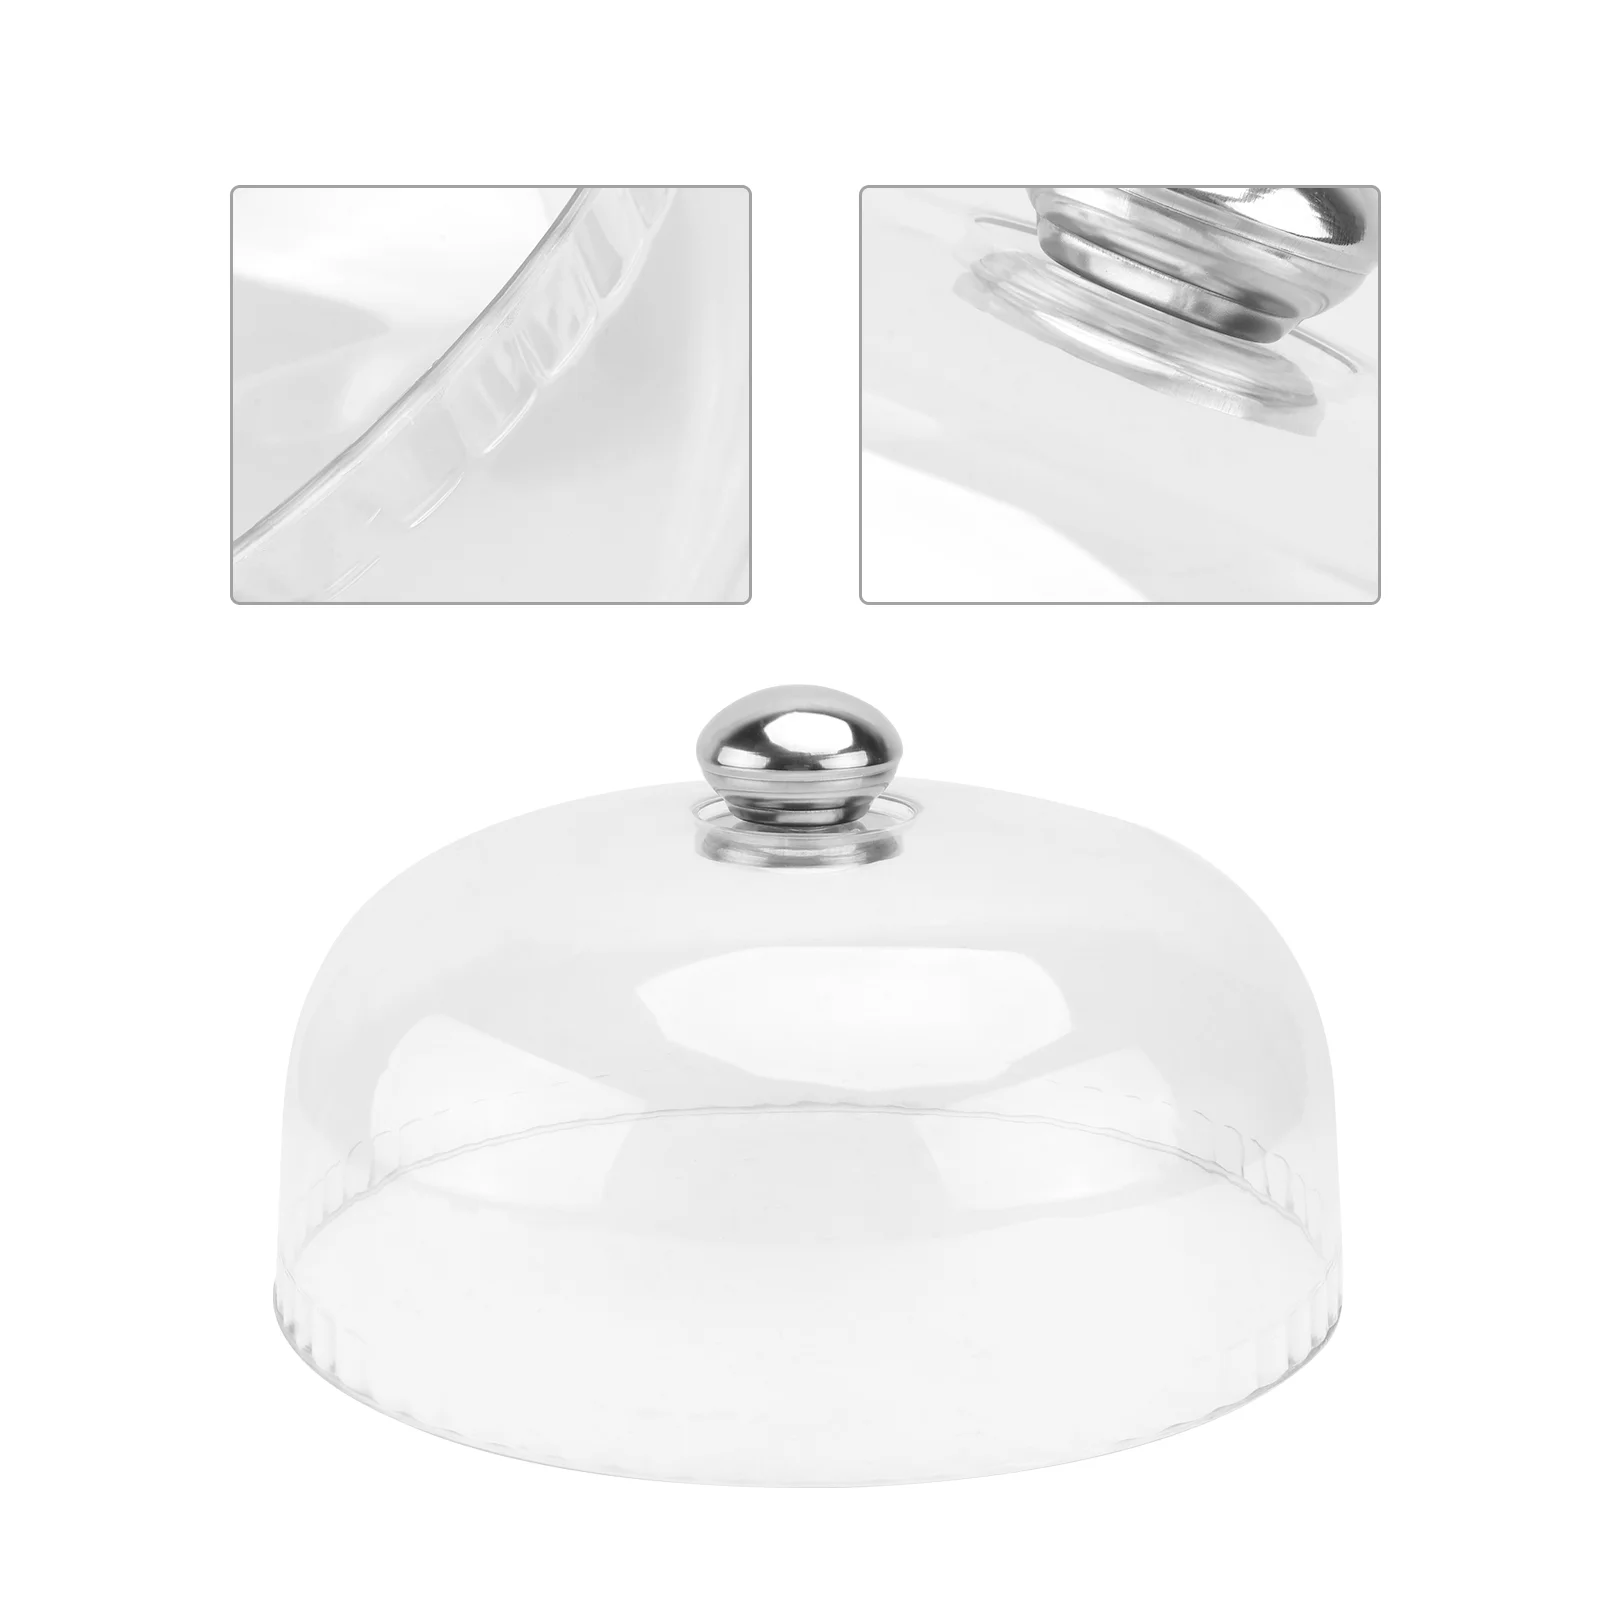 

Cover Cake Dome Stand Dessert Display Cloche Lid Serving Covers Plate Acrylic Cheese Snack Microwave Tray Protector Platter